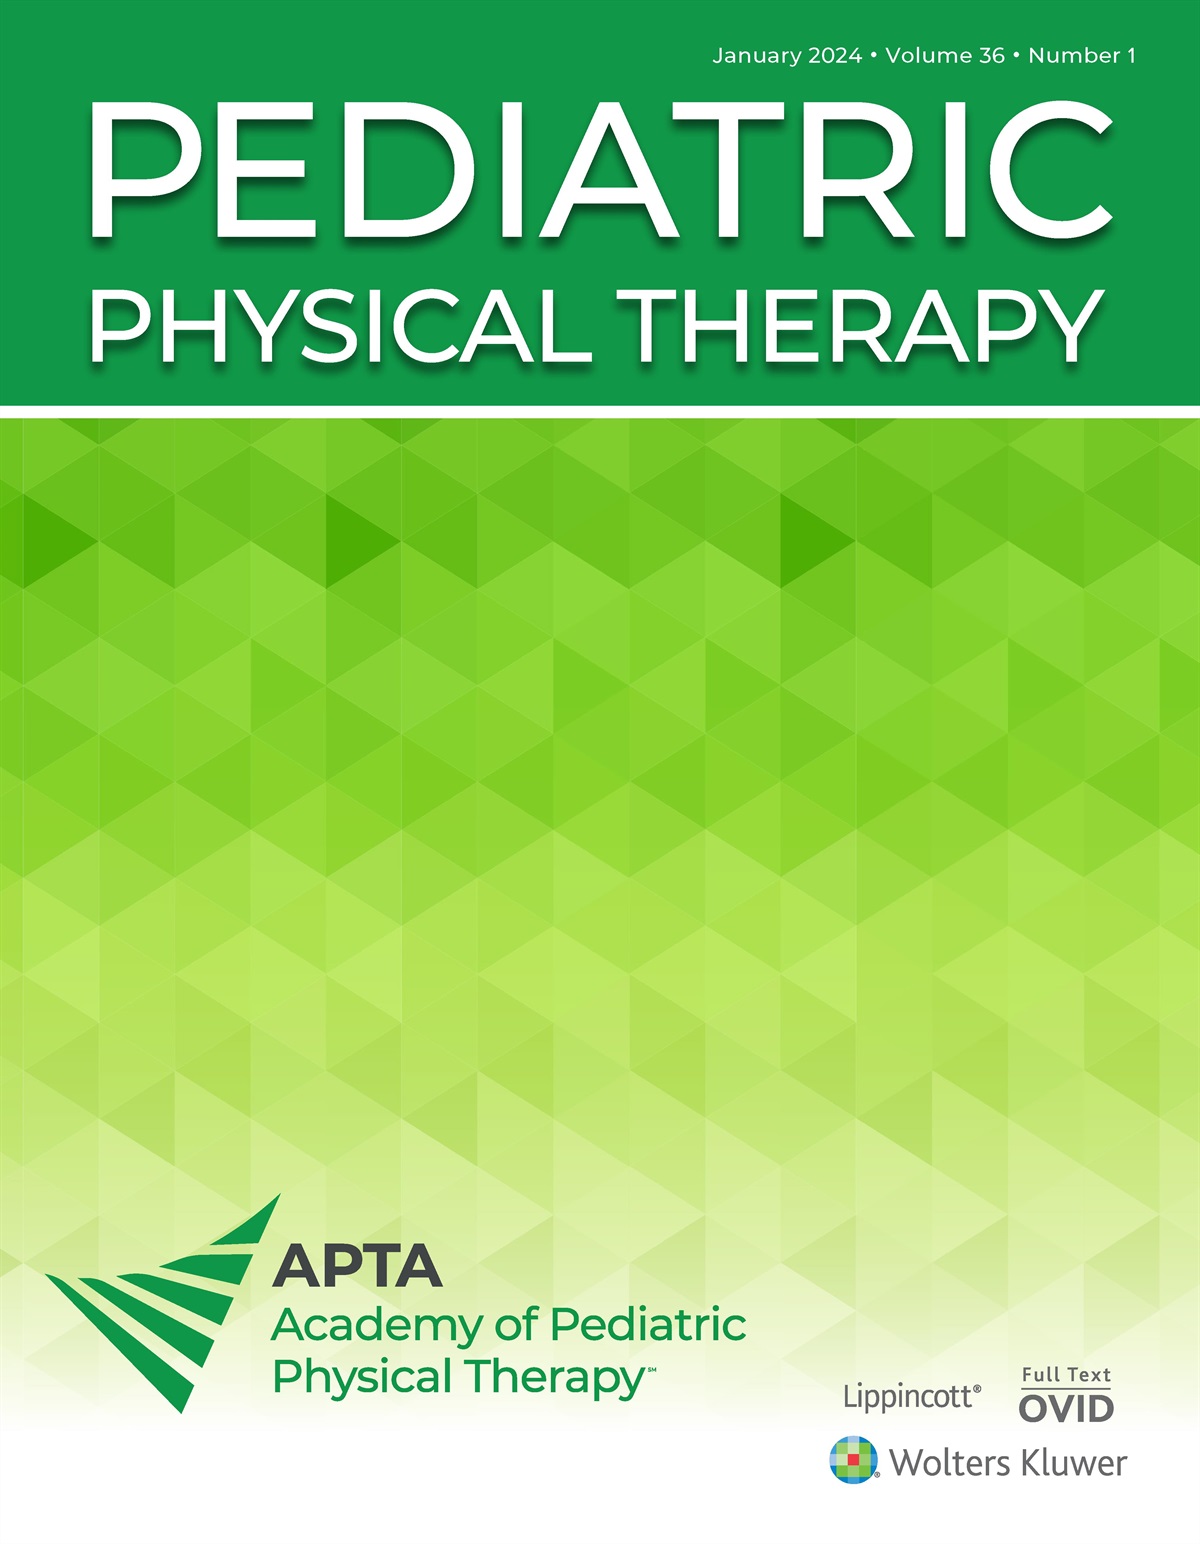 Abstracts of Platform Presentations for the Academy of Pediatric Physical Therapy Annual Conference 2023: Erratum